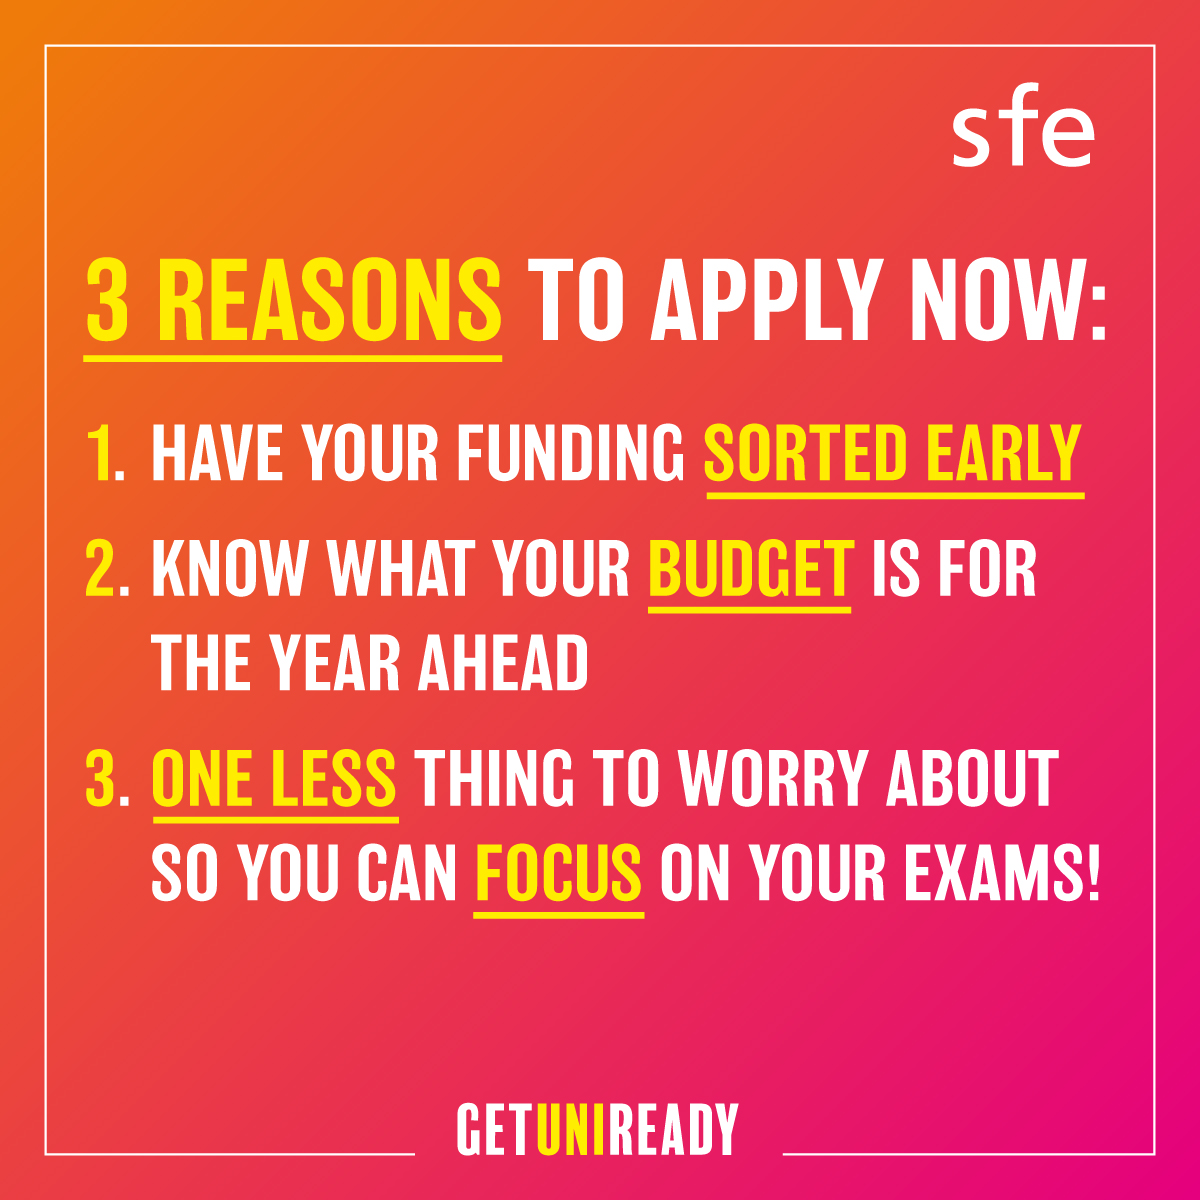 If you apply now, you can start seeing the benefits!

#GetUniReady and have your funding sorted so you can budget before you go to uni!

Find out how to apply: studentfinance.campaign.gov.uk